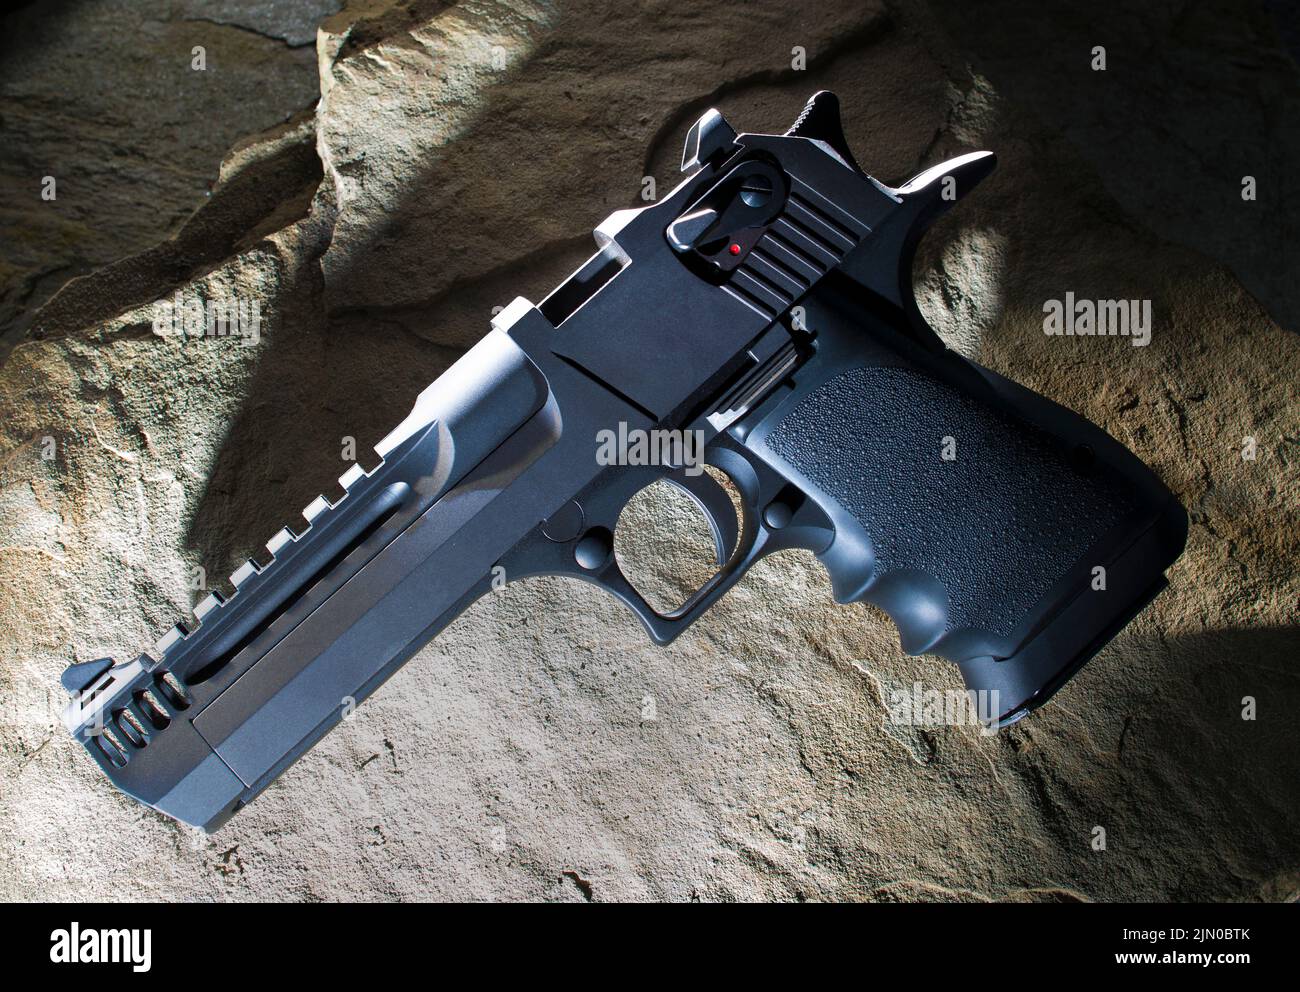 Large semi-automatic handgun on a brown stone background Stock Photo